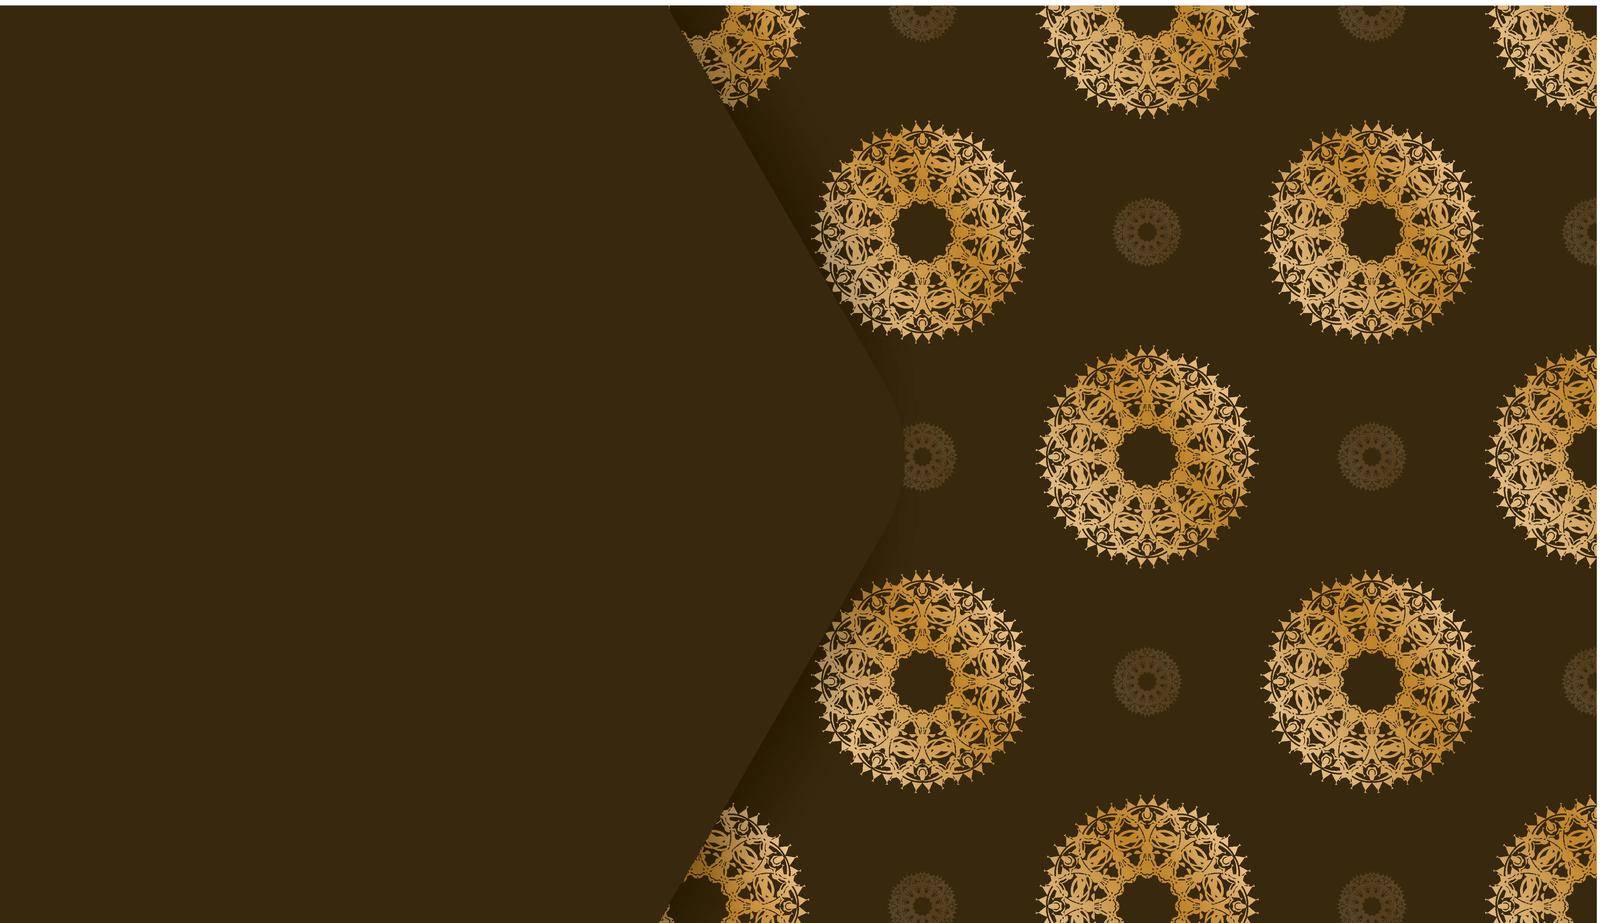 Background in brown with greek gold ornaments and logo spot